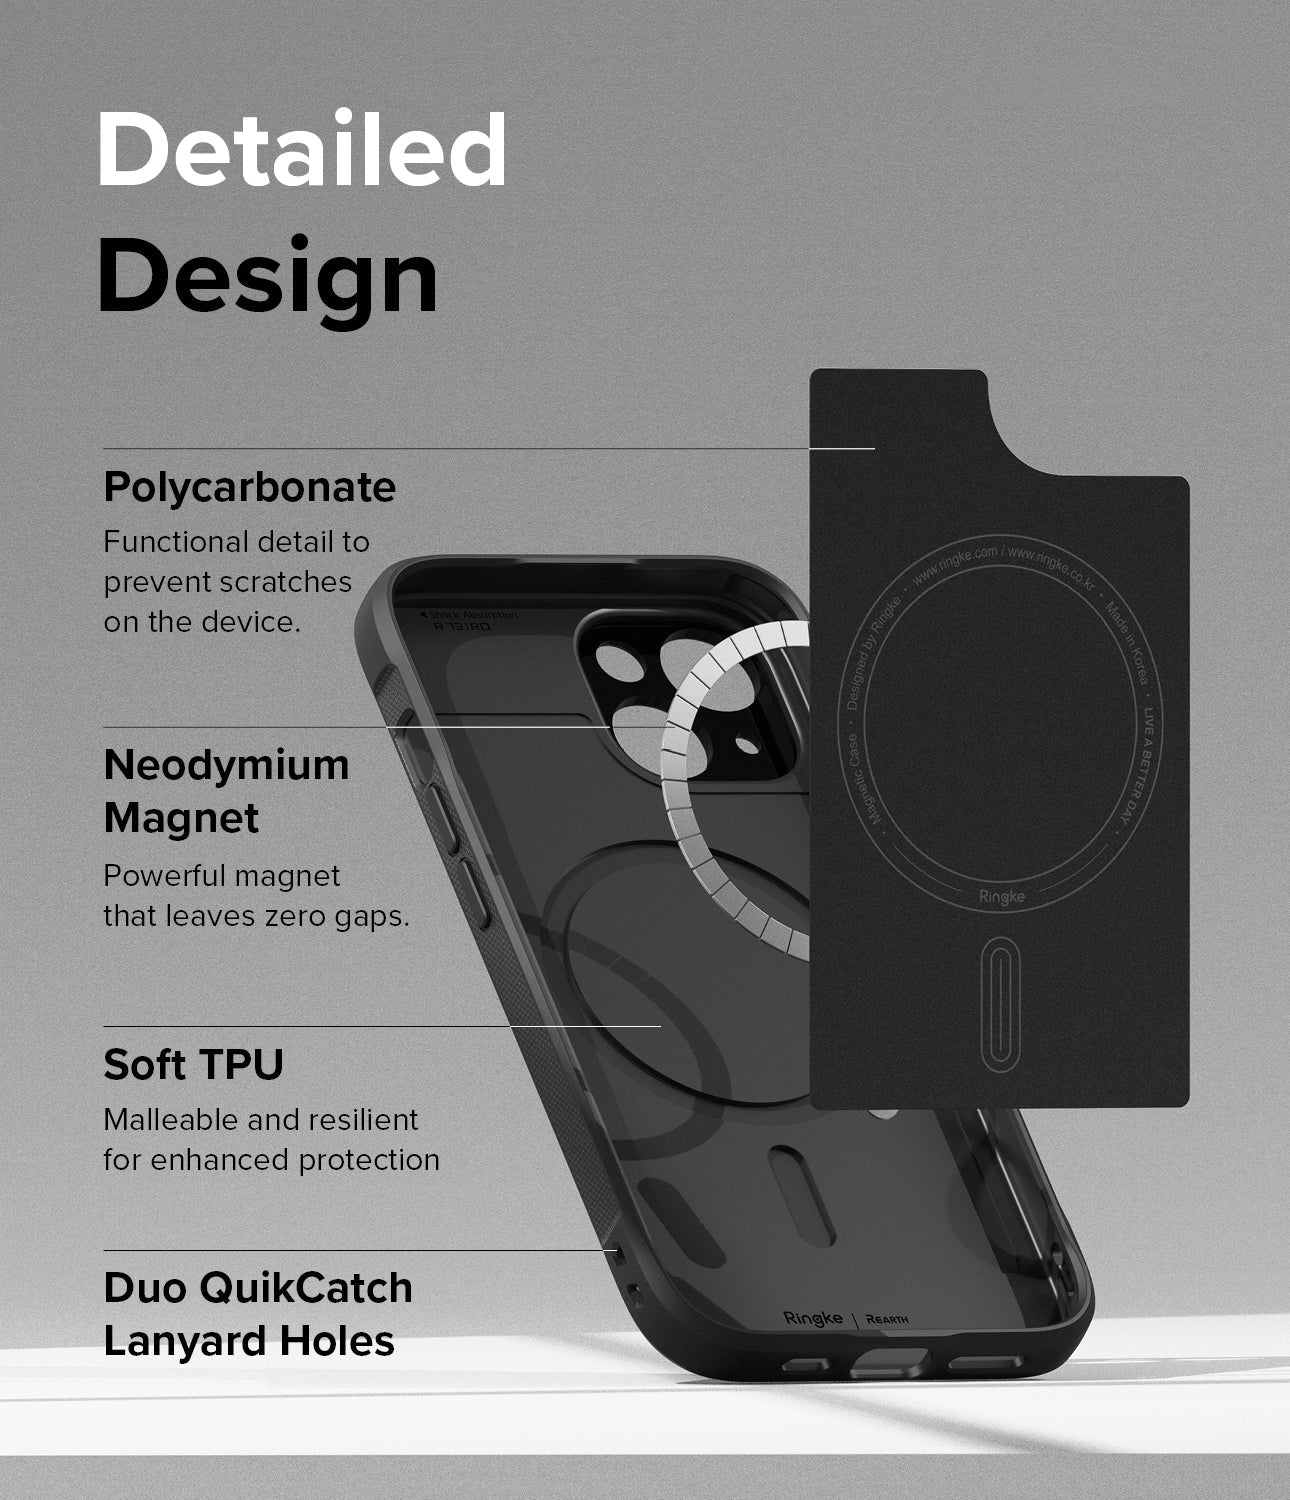 iPhone 15 Plus Case | Onyx Magnetic - Detailed Design. Polycarbonate functional detail to prevent scratches on the device. Neodymium Magnet that leaves zero gap. Soft TPU. Malleable and resilient for enhanced protection. Duo QuikCatch Lanyard Holes.